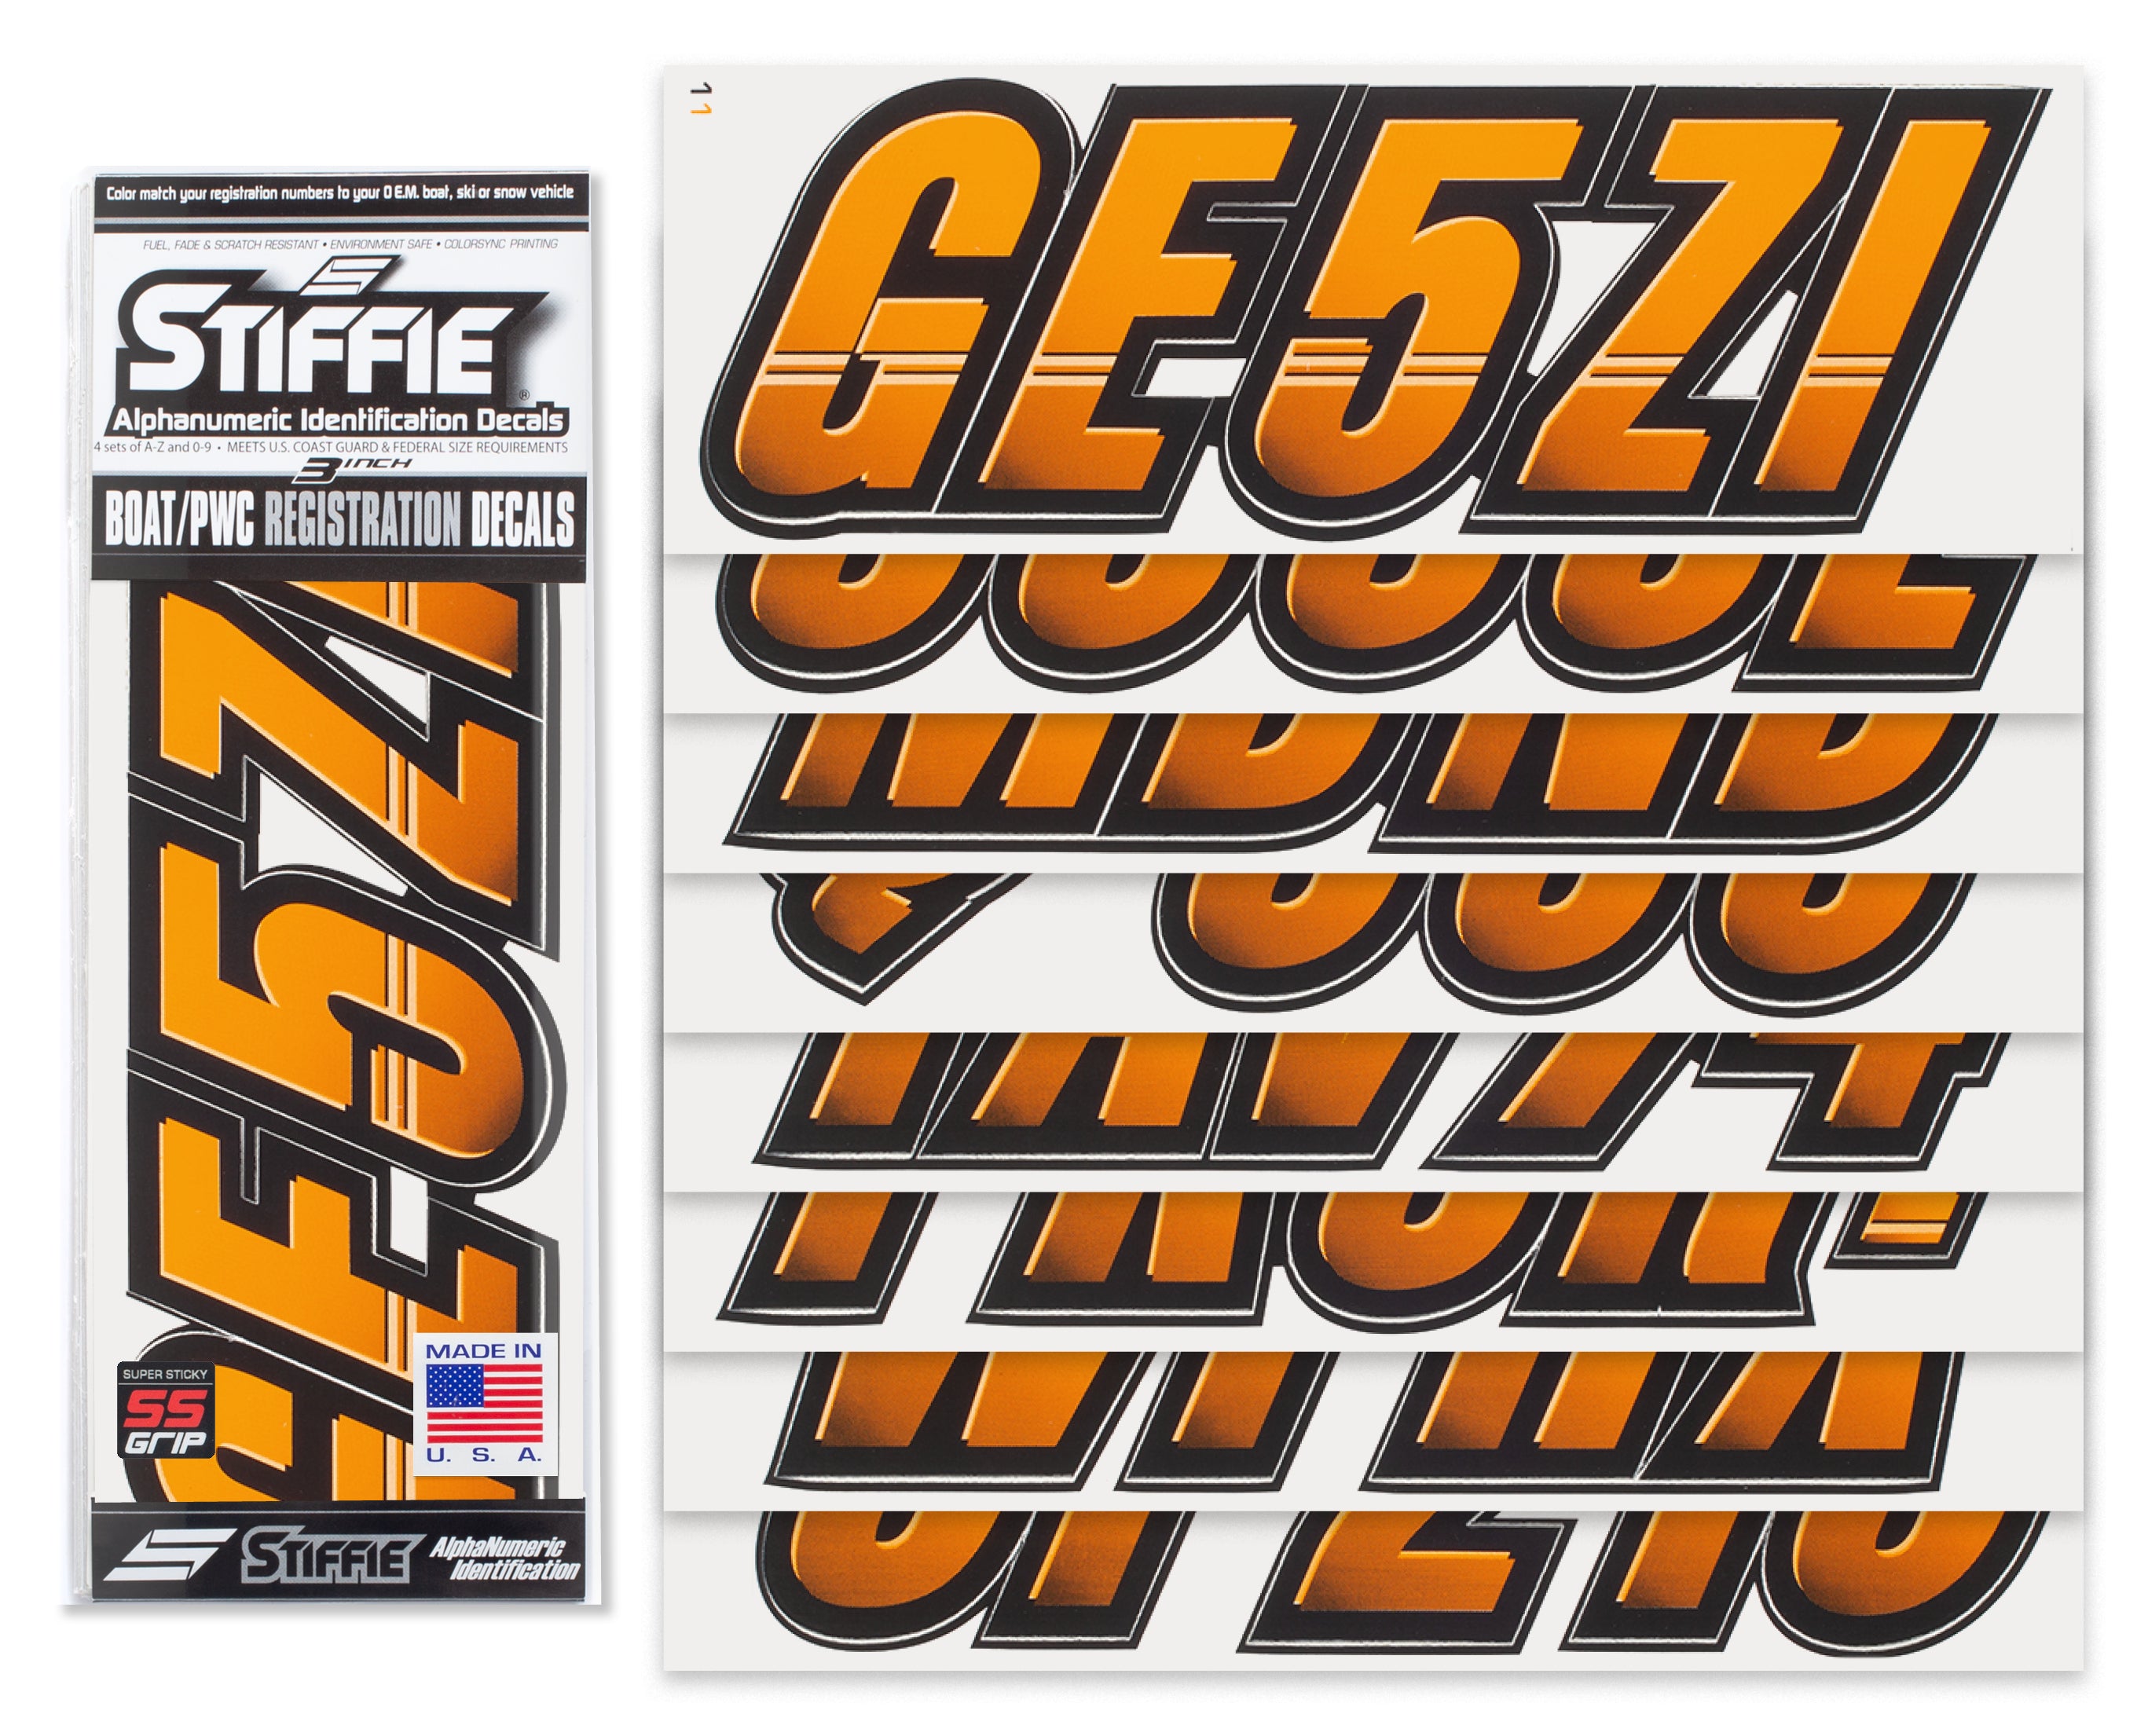 Stiffie Techtron Orange Crush/Black Super Sticky 3" Alpha Numeric Registration Identification Numbers Stickers Decals for Sea-Doo Spark, Inflatable Boats, Ribs, Hypalon/PVC, PWC and Boats